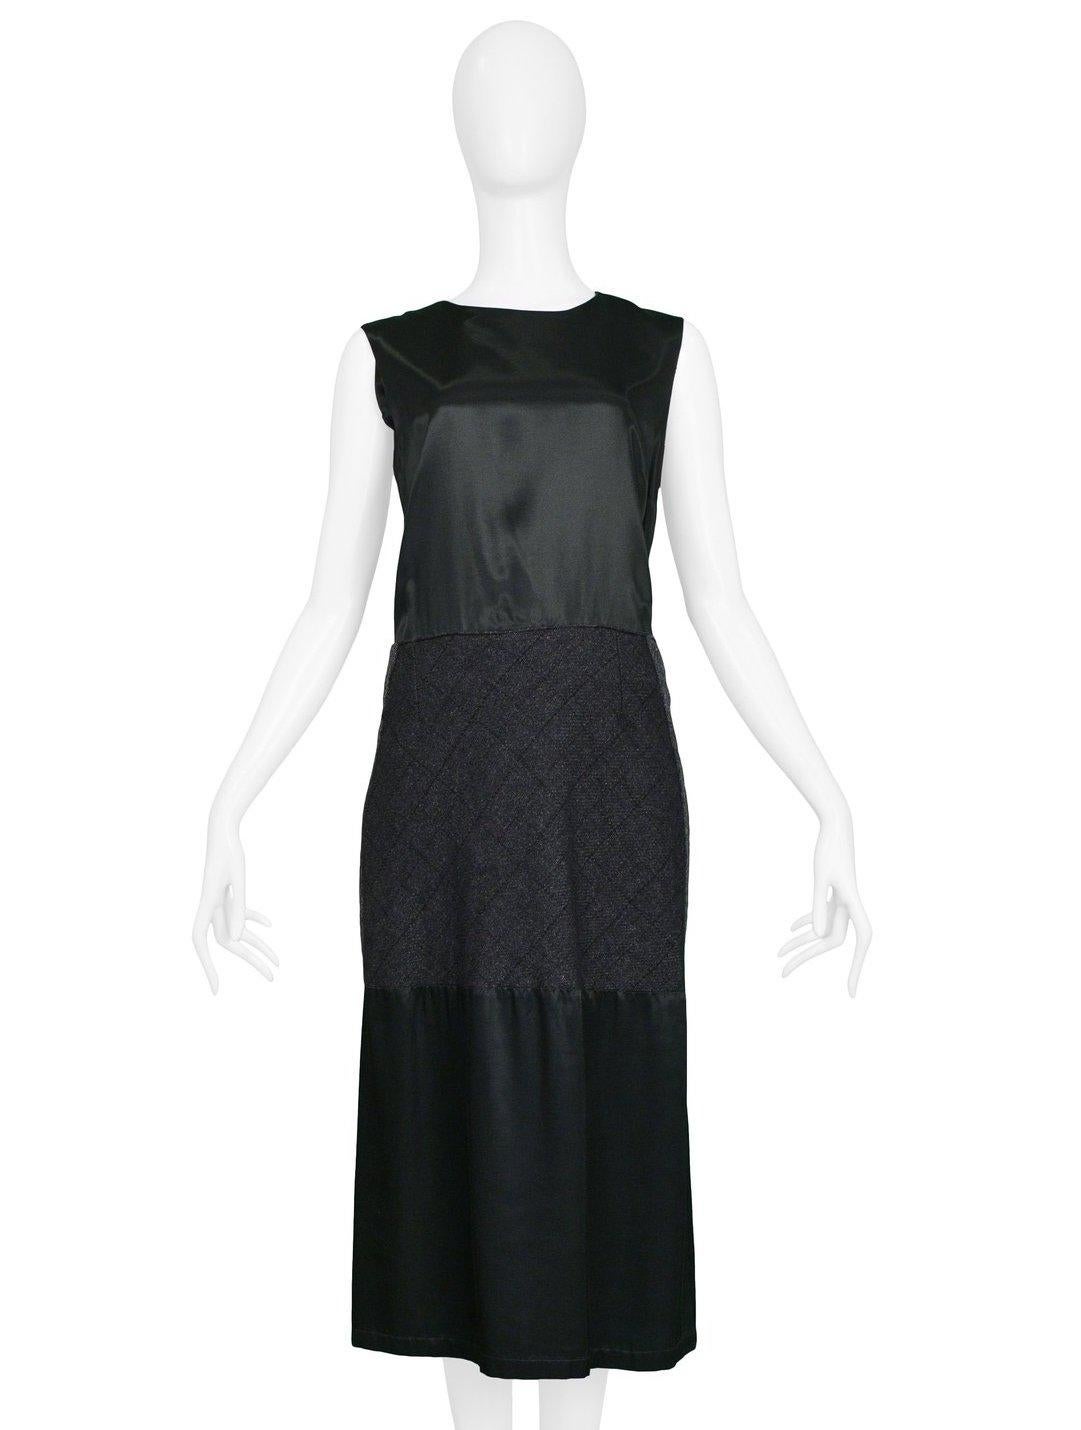 Maison Martin Margiela Artisanal Satin & Wool Panel Dress 2002 In Excellent Condition For Sale In Los Angeles, CA